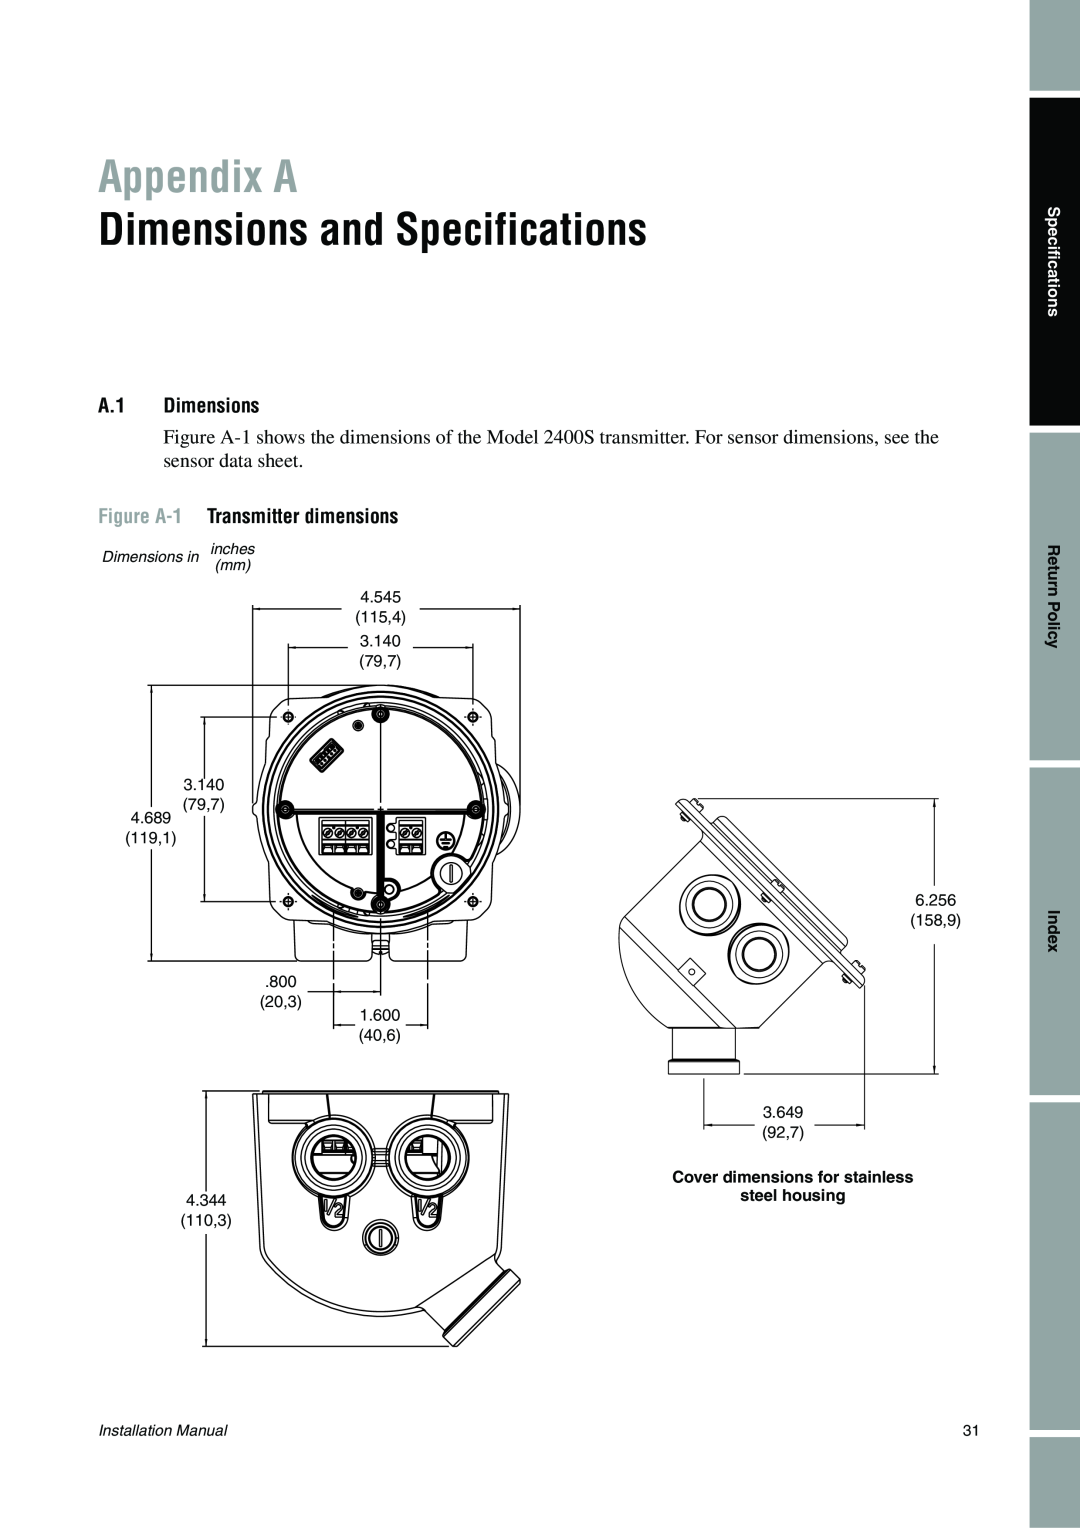 Emerson 2400S Appendix A, Dimensions and Specifications, A.1 Dimensions, Figure A-1 Transmitter dimensions, Policy Index 